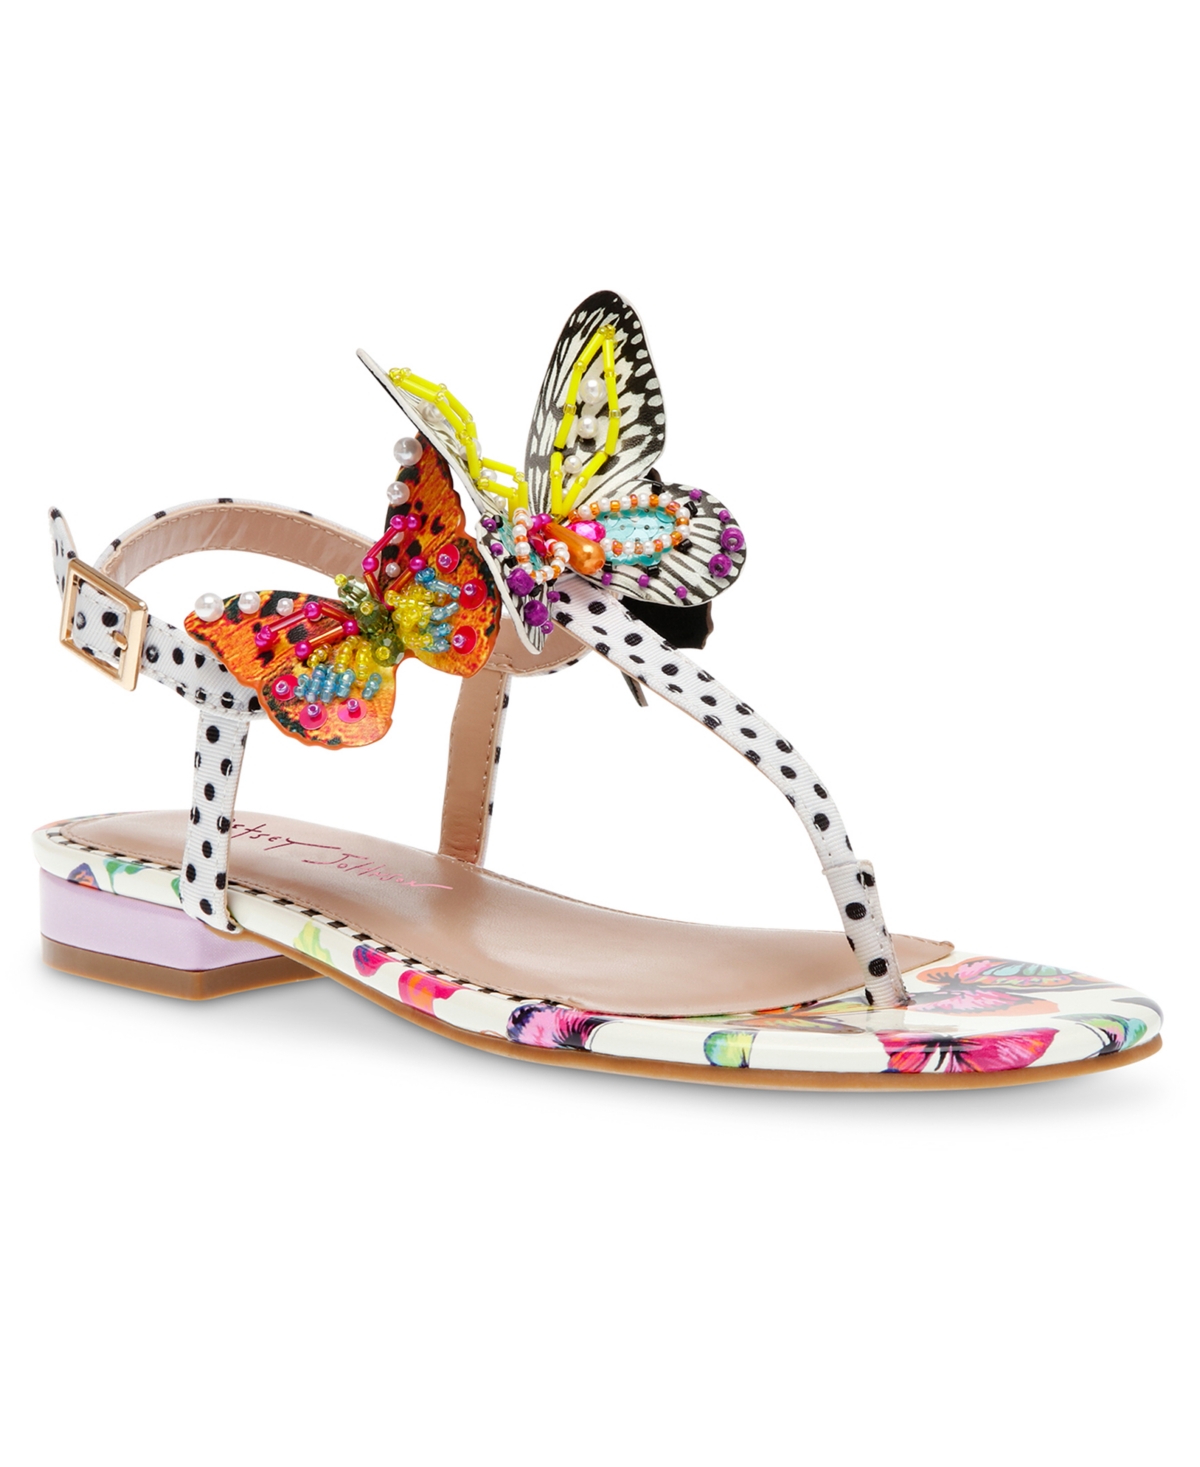 Dacie T-thong Sandal with Butterfly Details - White Multi